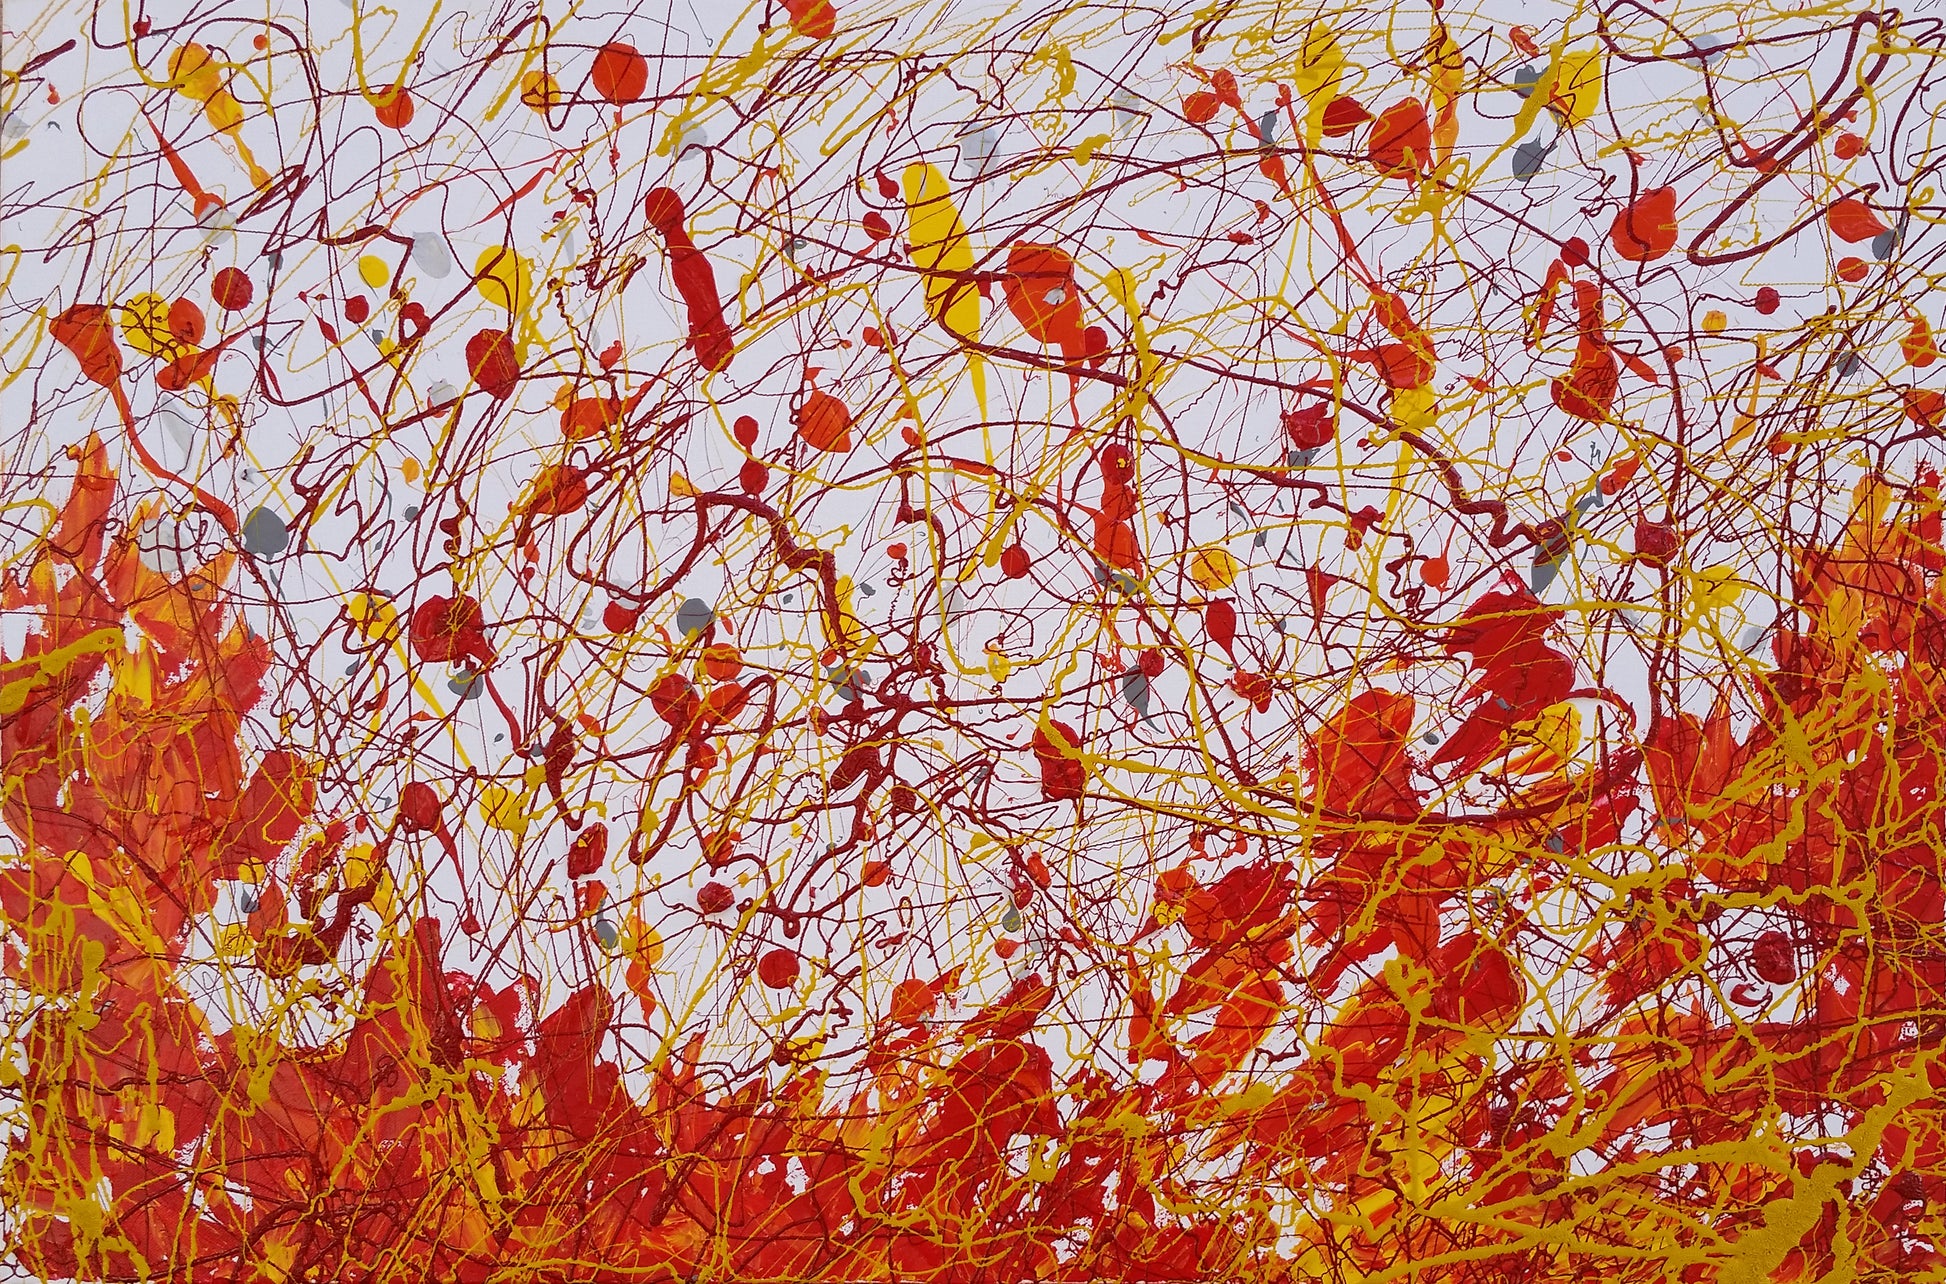 Fire-Dance-Alexandra-Romano-Unique-Action-Paintings-Sale-Buy-Abstract-Art-Online-Shopping-Toronto-Art-Gallery